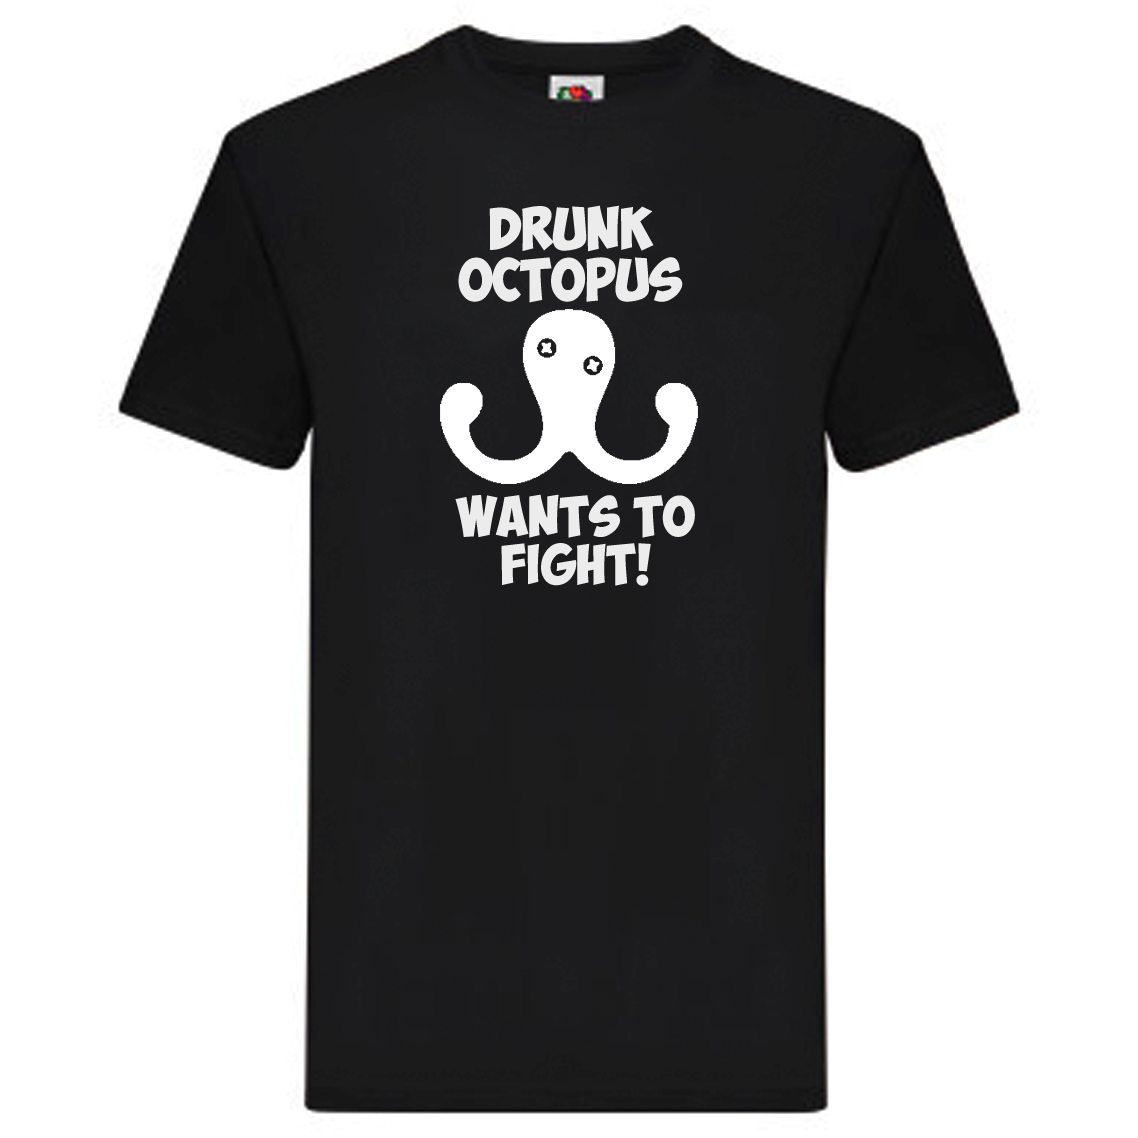 T-Shirt - Drunk Octopus wants to fight!